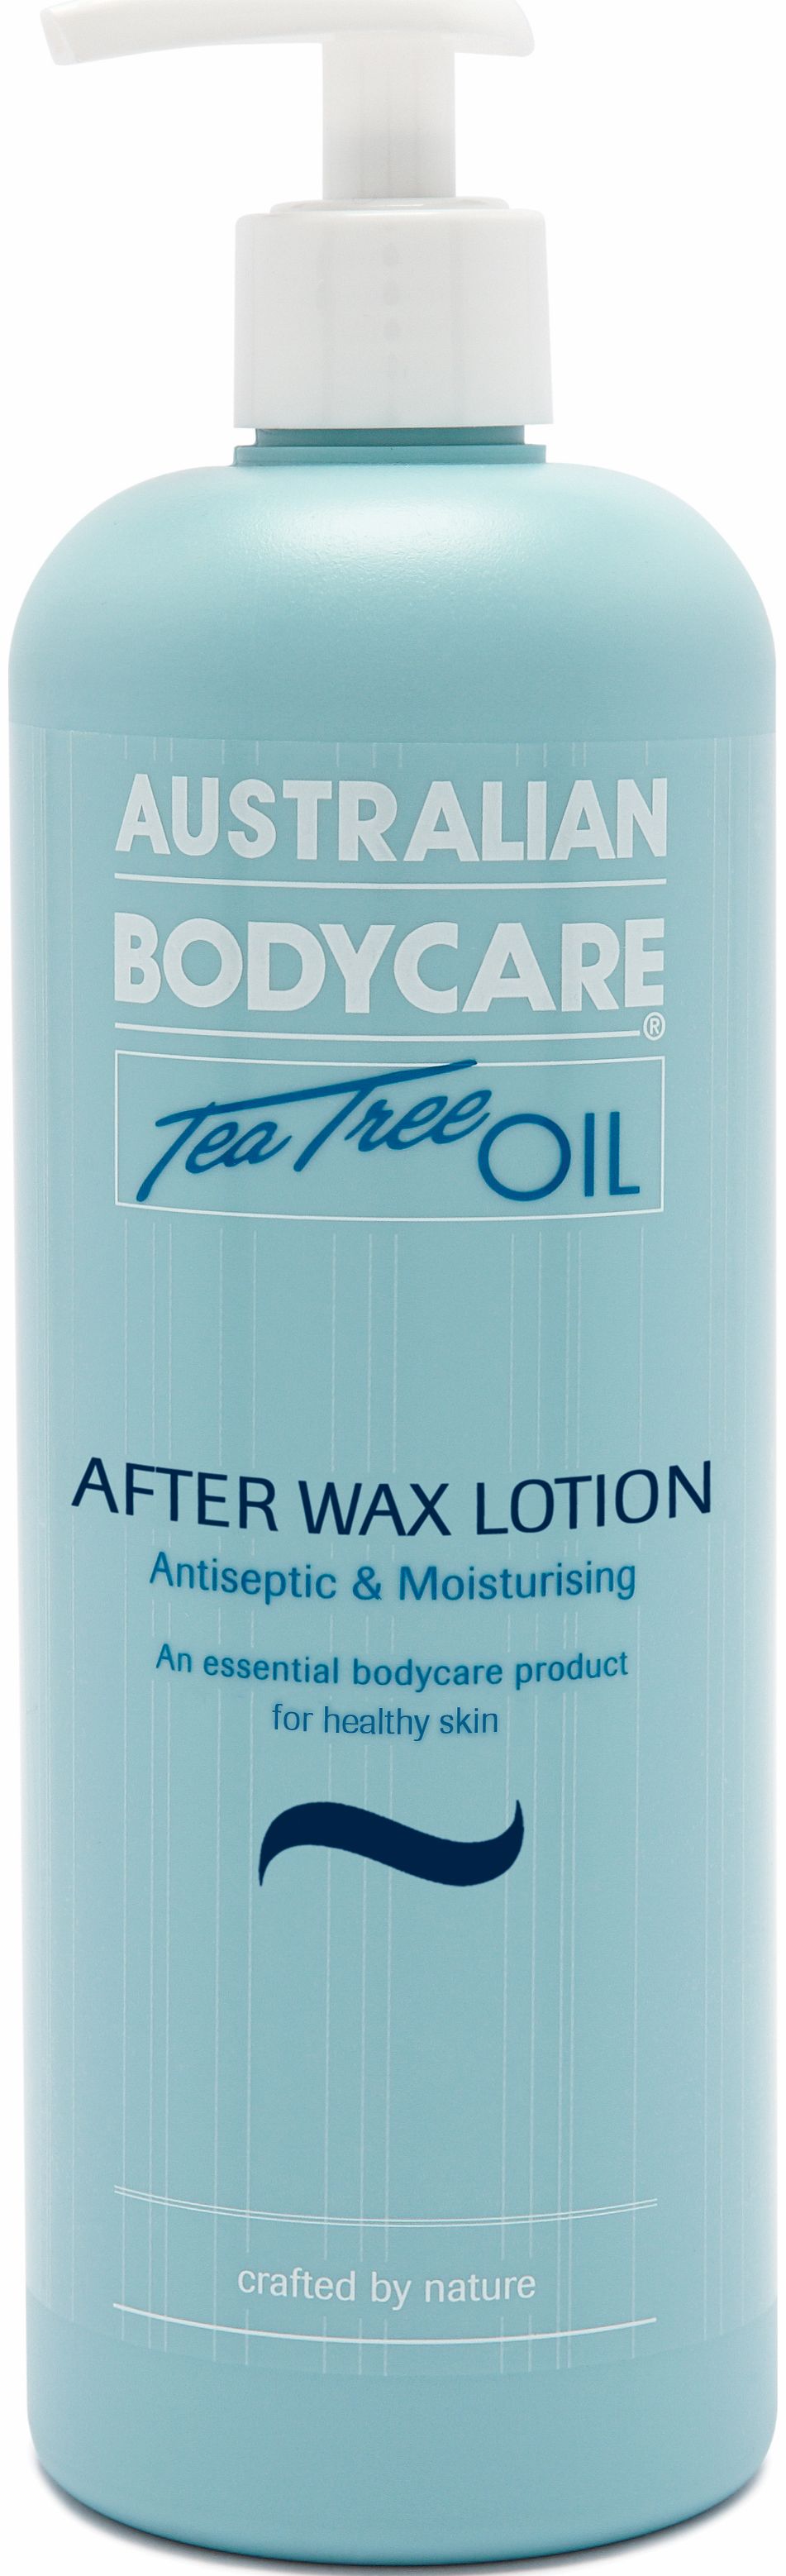 After Wax Lotion (1000ml)